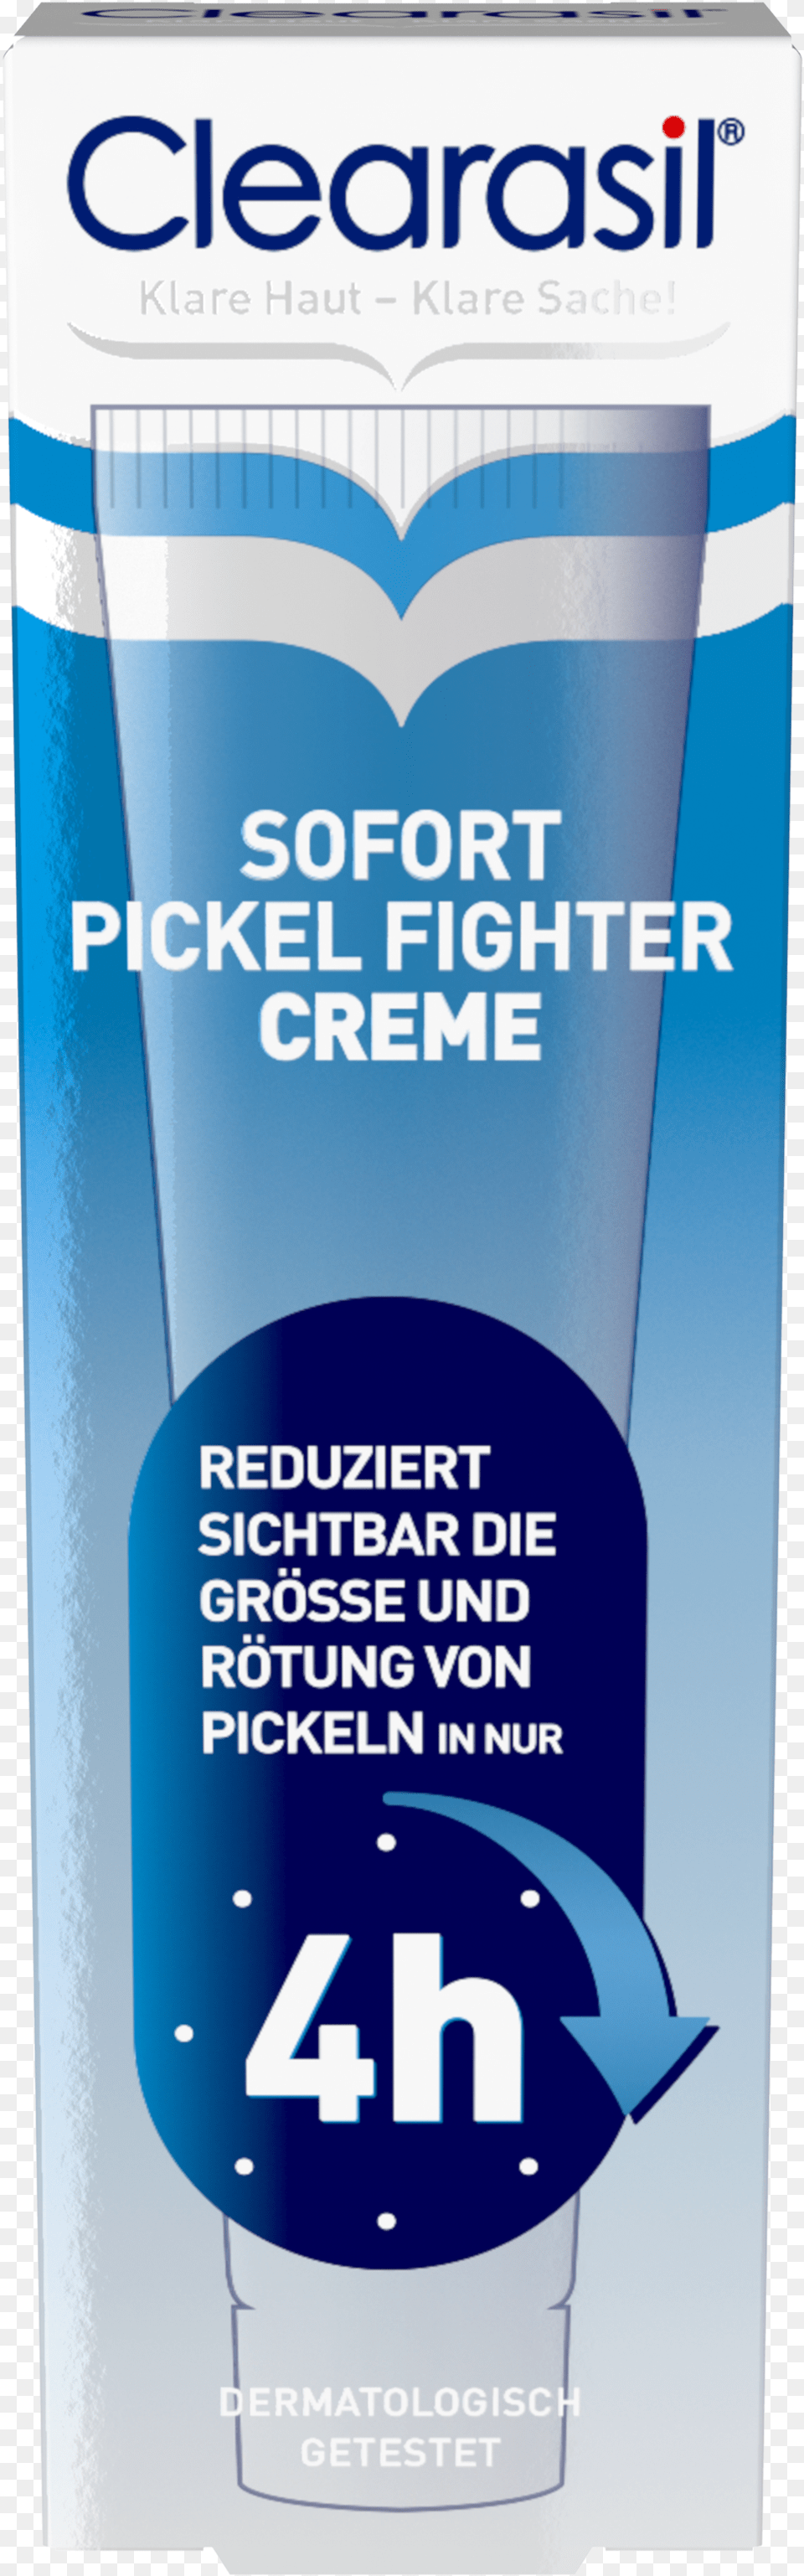 Clearasil Sofort Pickel Fighter Creme, Advertisement, Poster, Bottle, Can Png Image